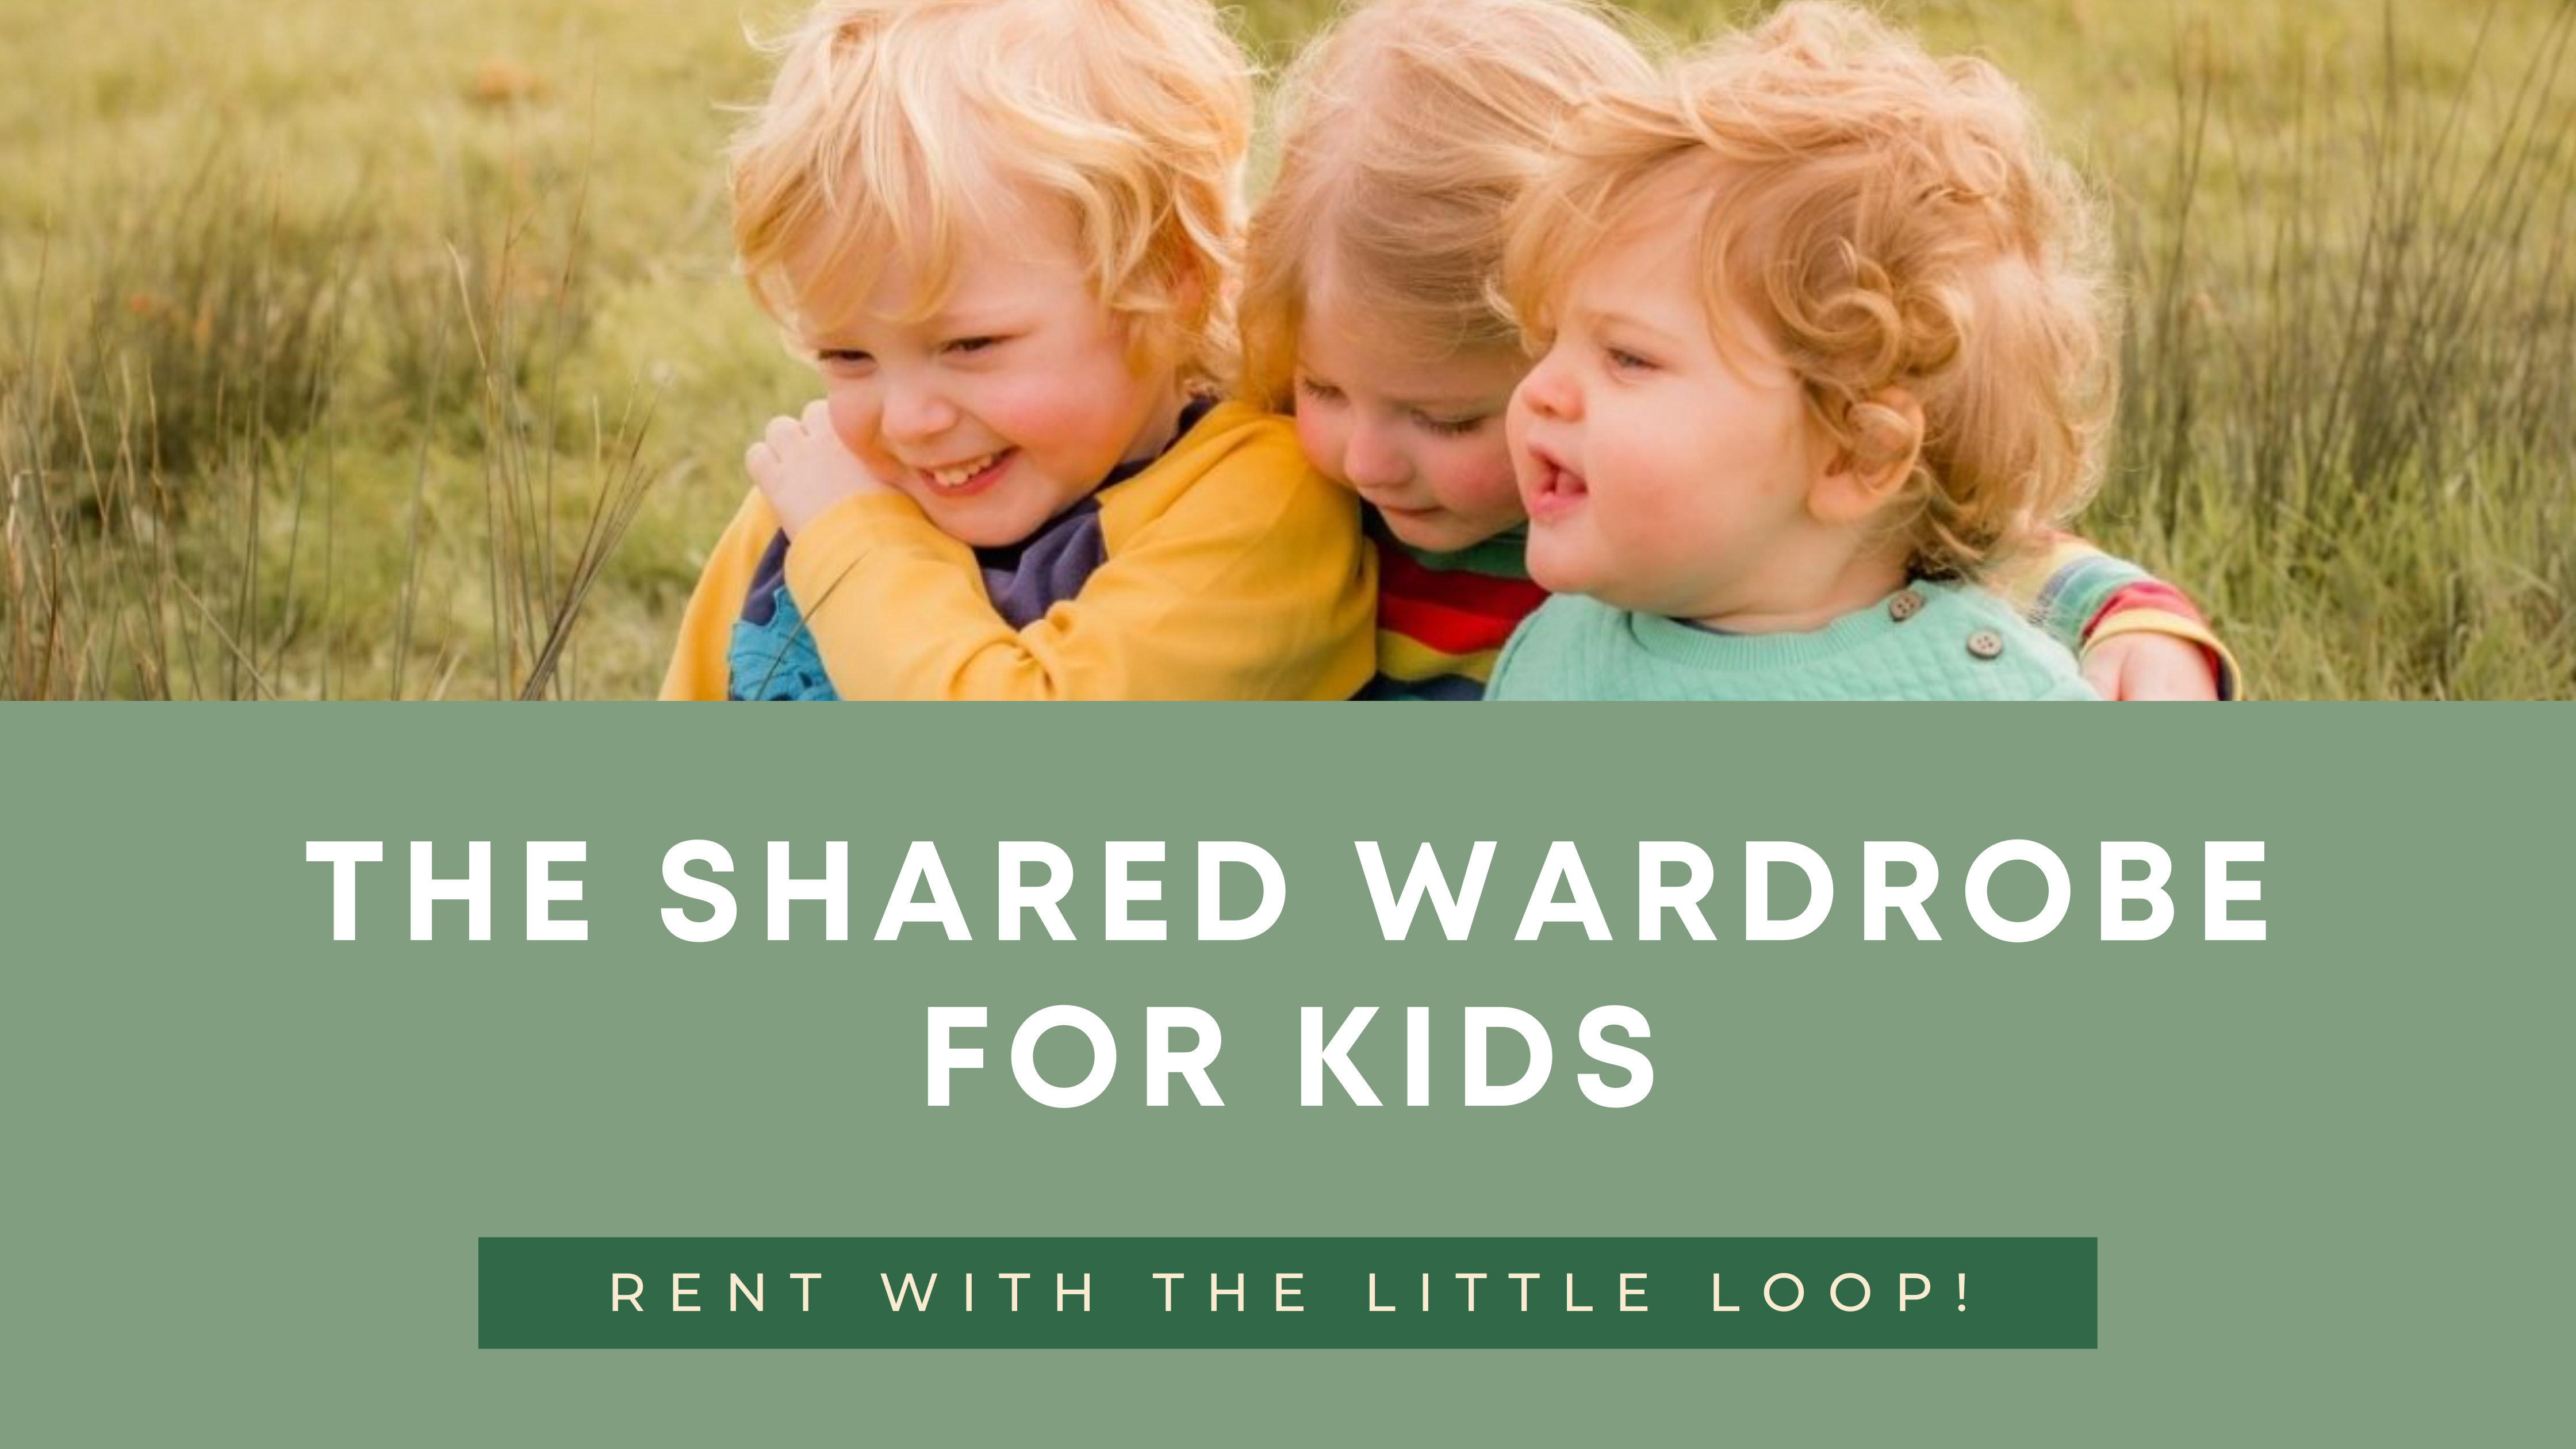 Thelittleloop - The Shared Wardrobe for Kids